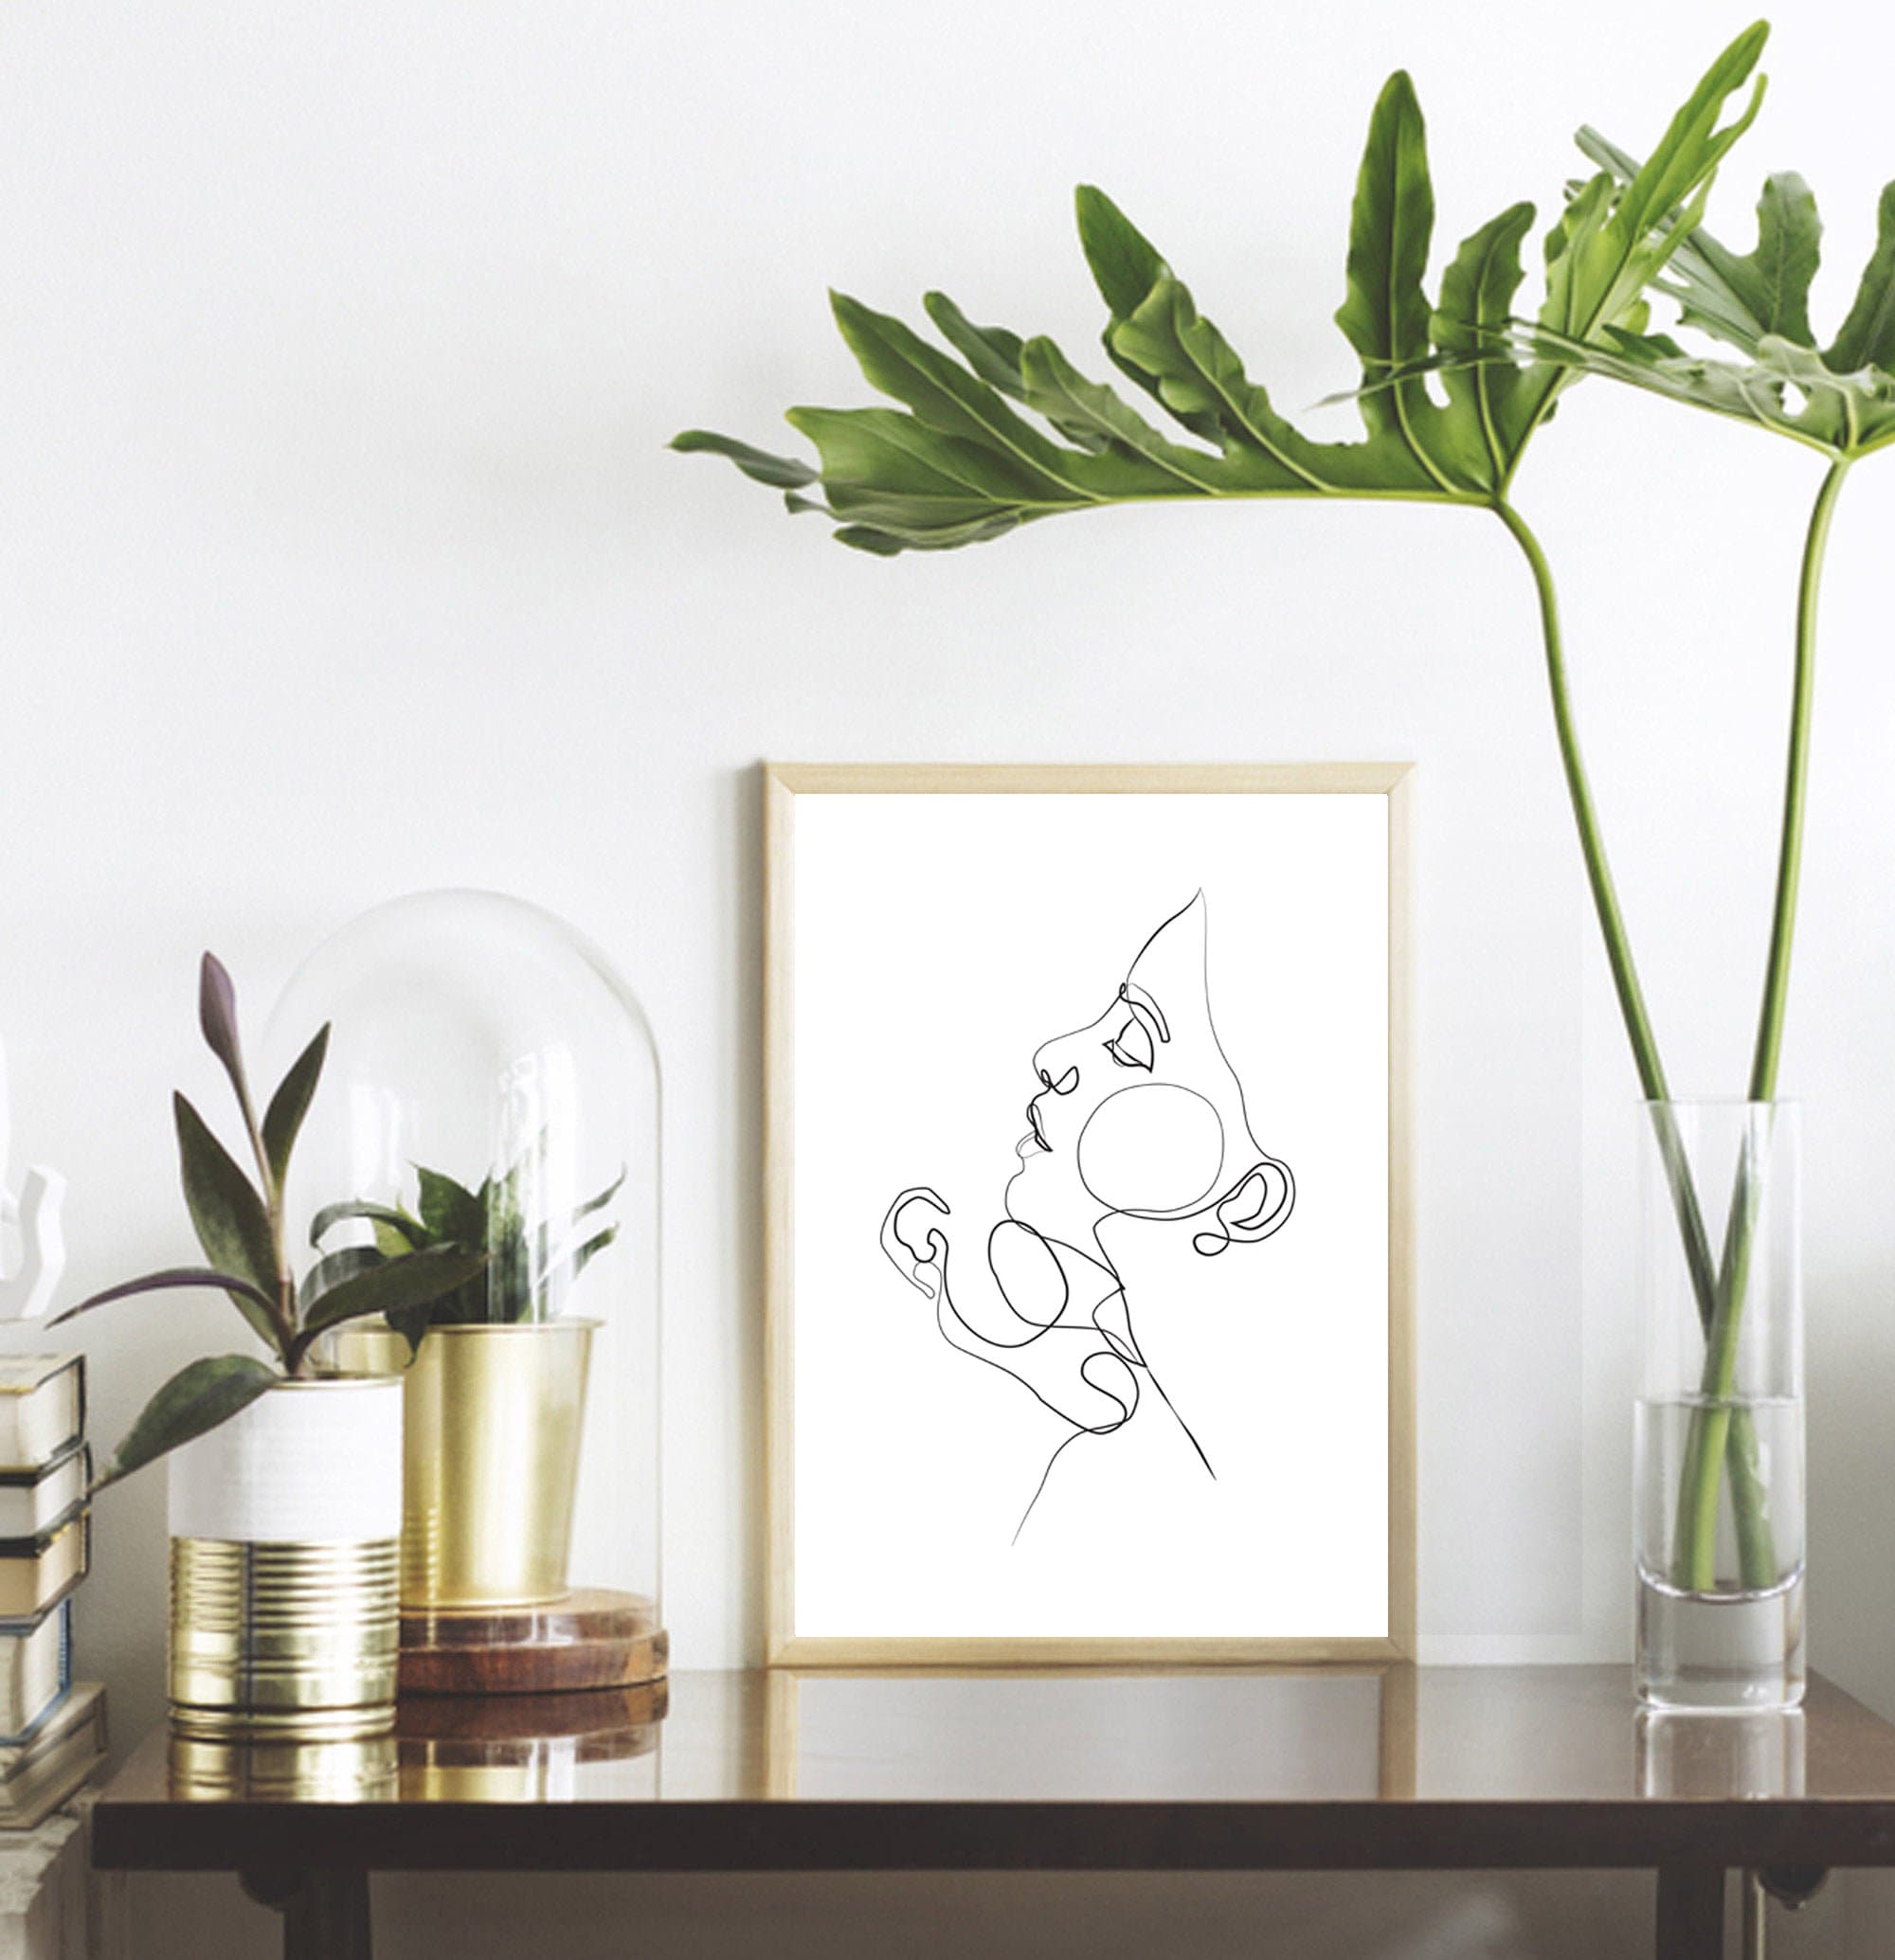 Family Portrait, Minimalist Wall Art, Couple  Line Drawing Poster